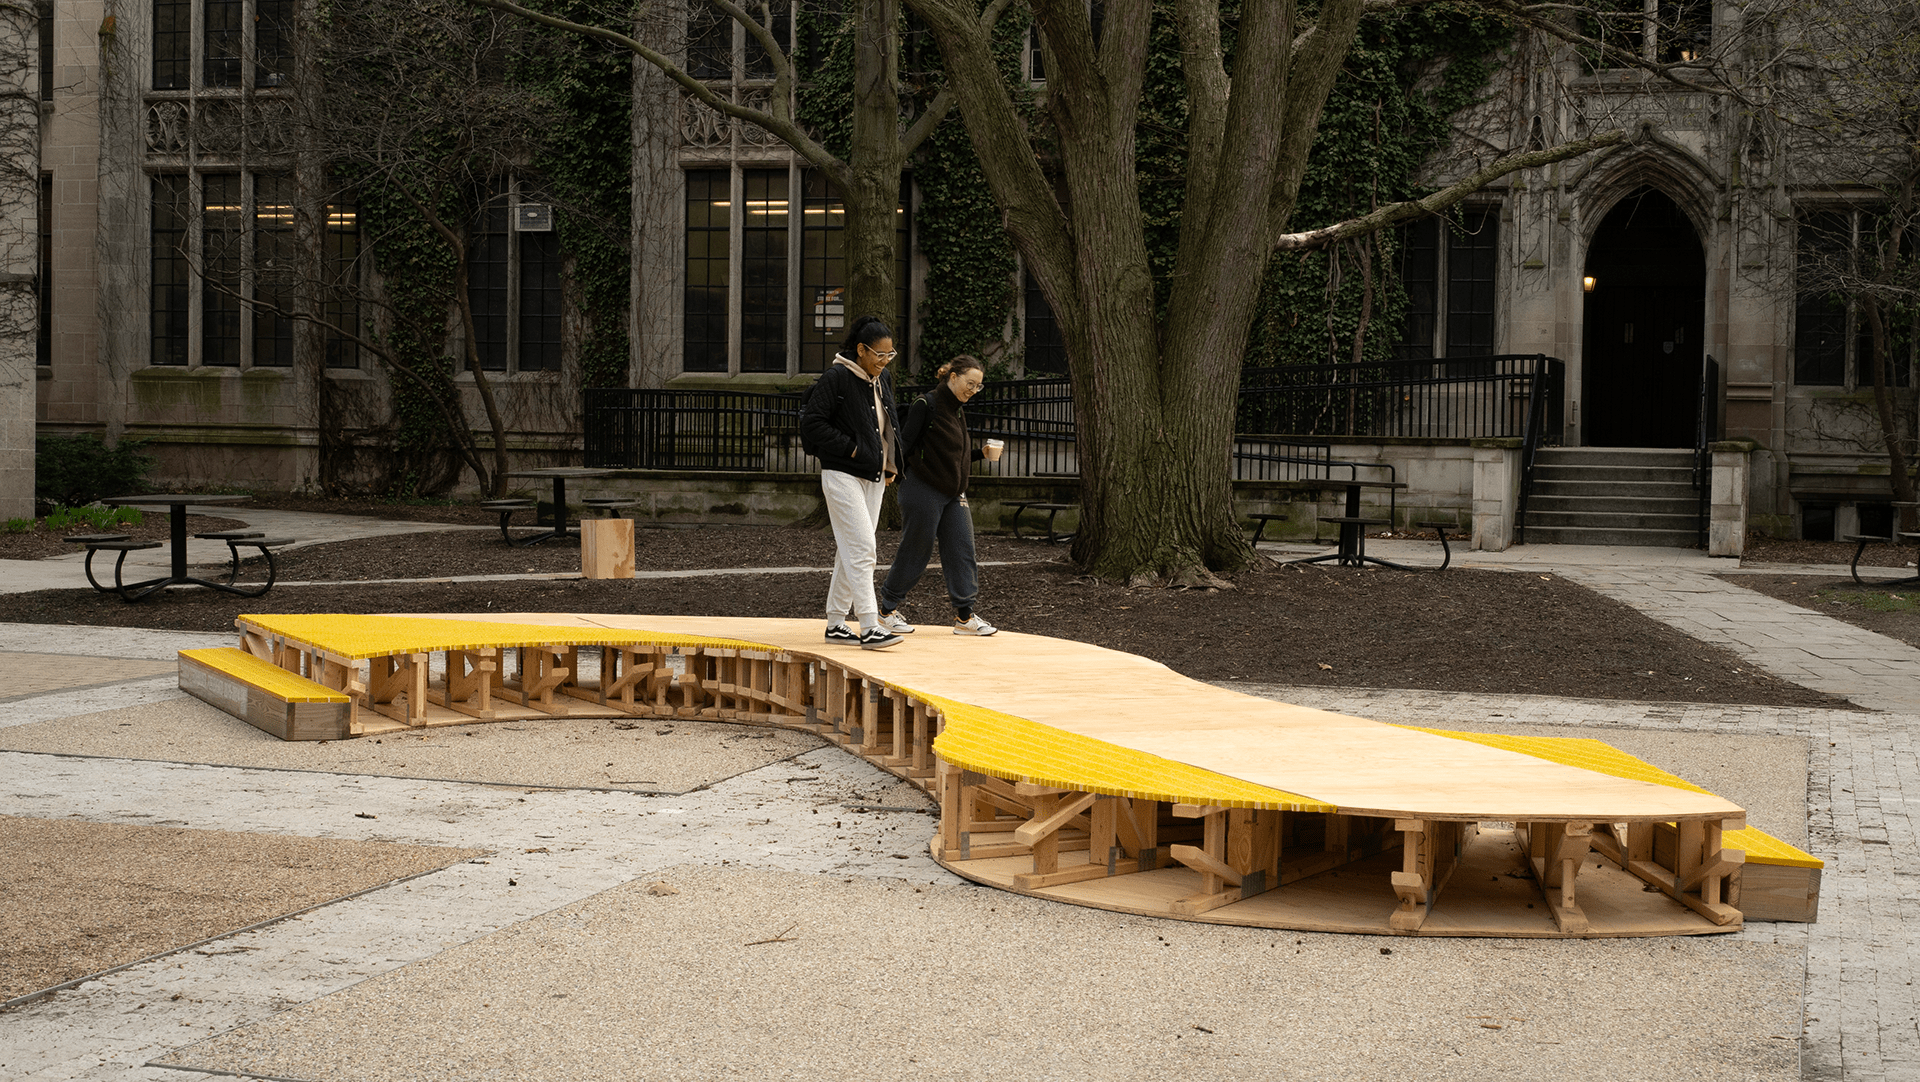 Two people stroll across a low s-shaped platform sculpture